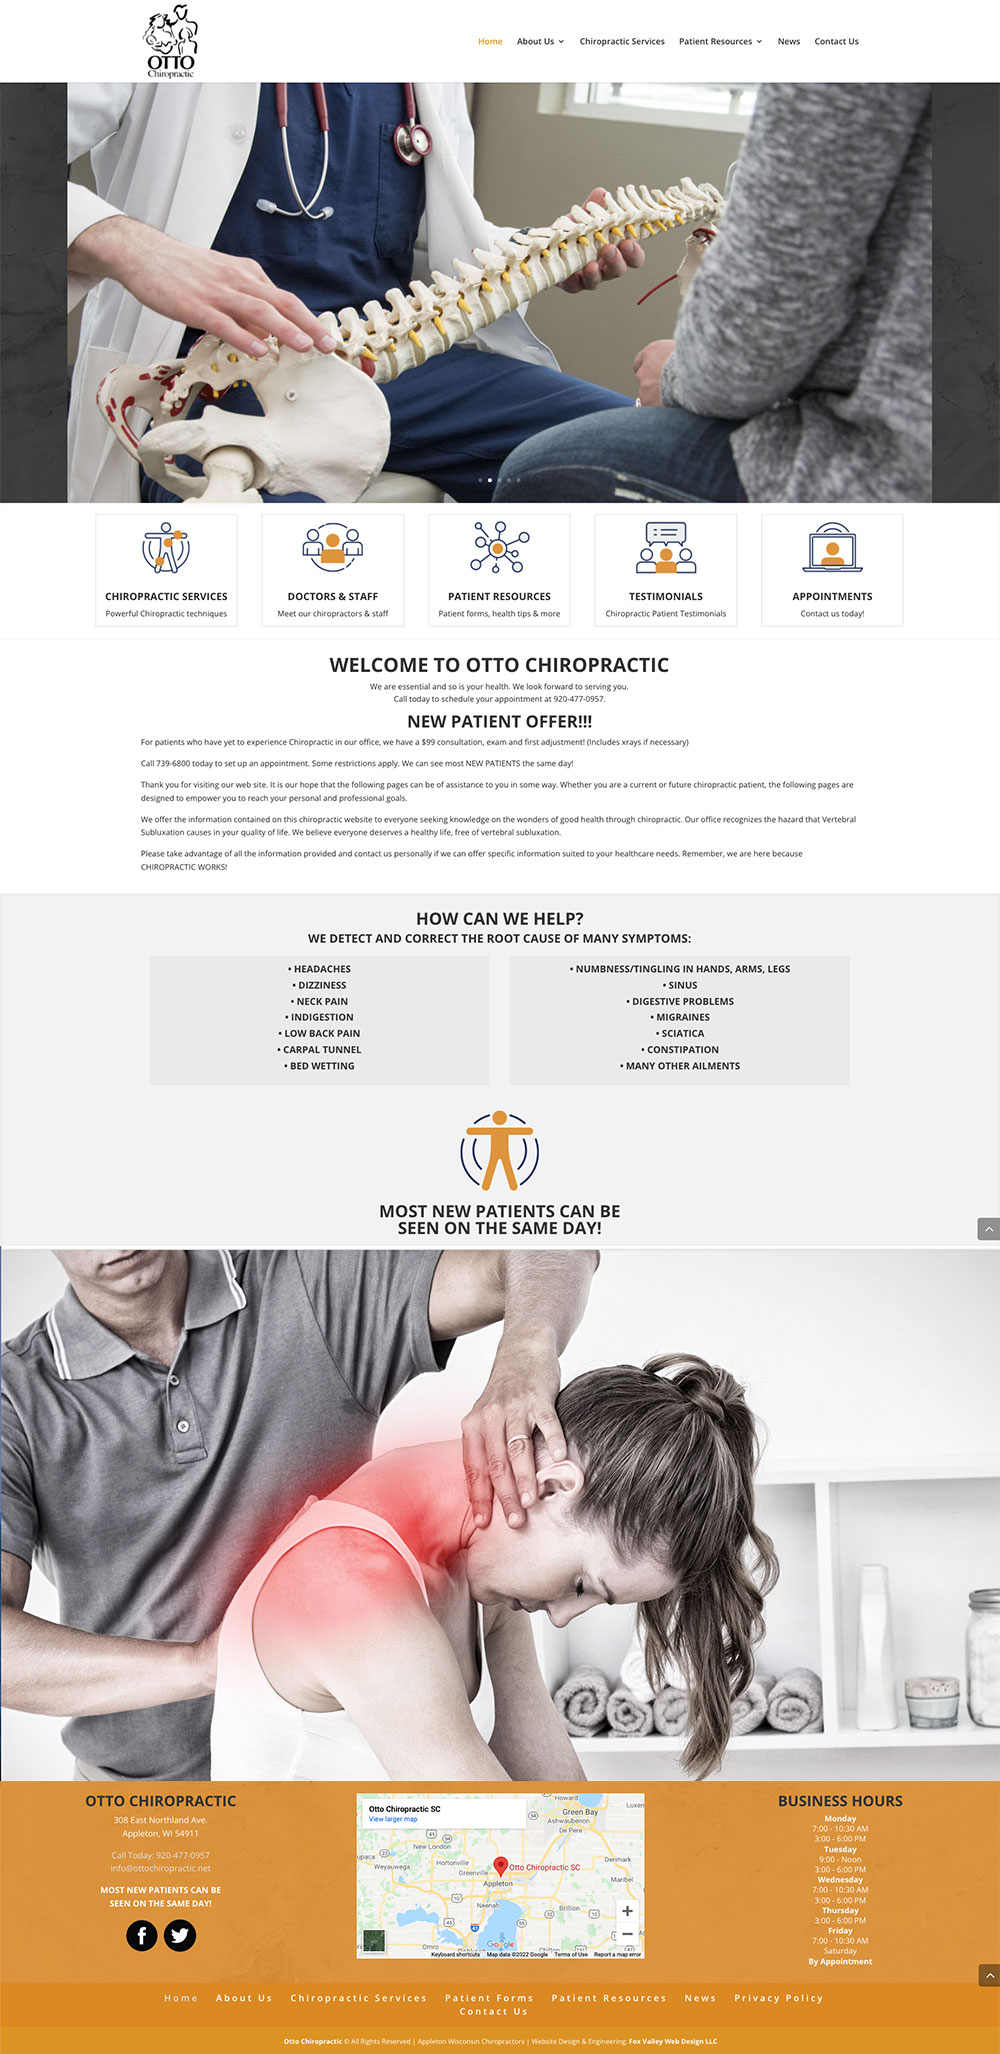 OTTO CHIROPRACTIC, appleton wisconsin, doctors, md, CHIROPRACTIC SERVICES